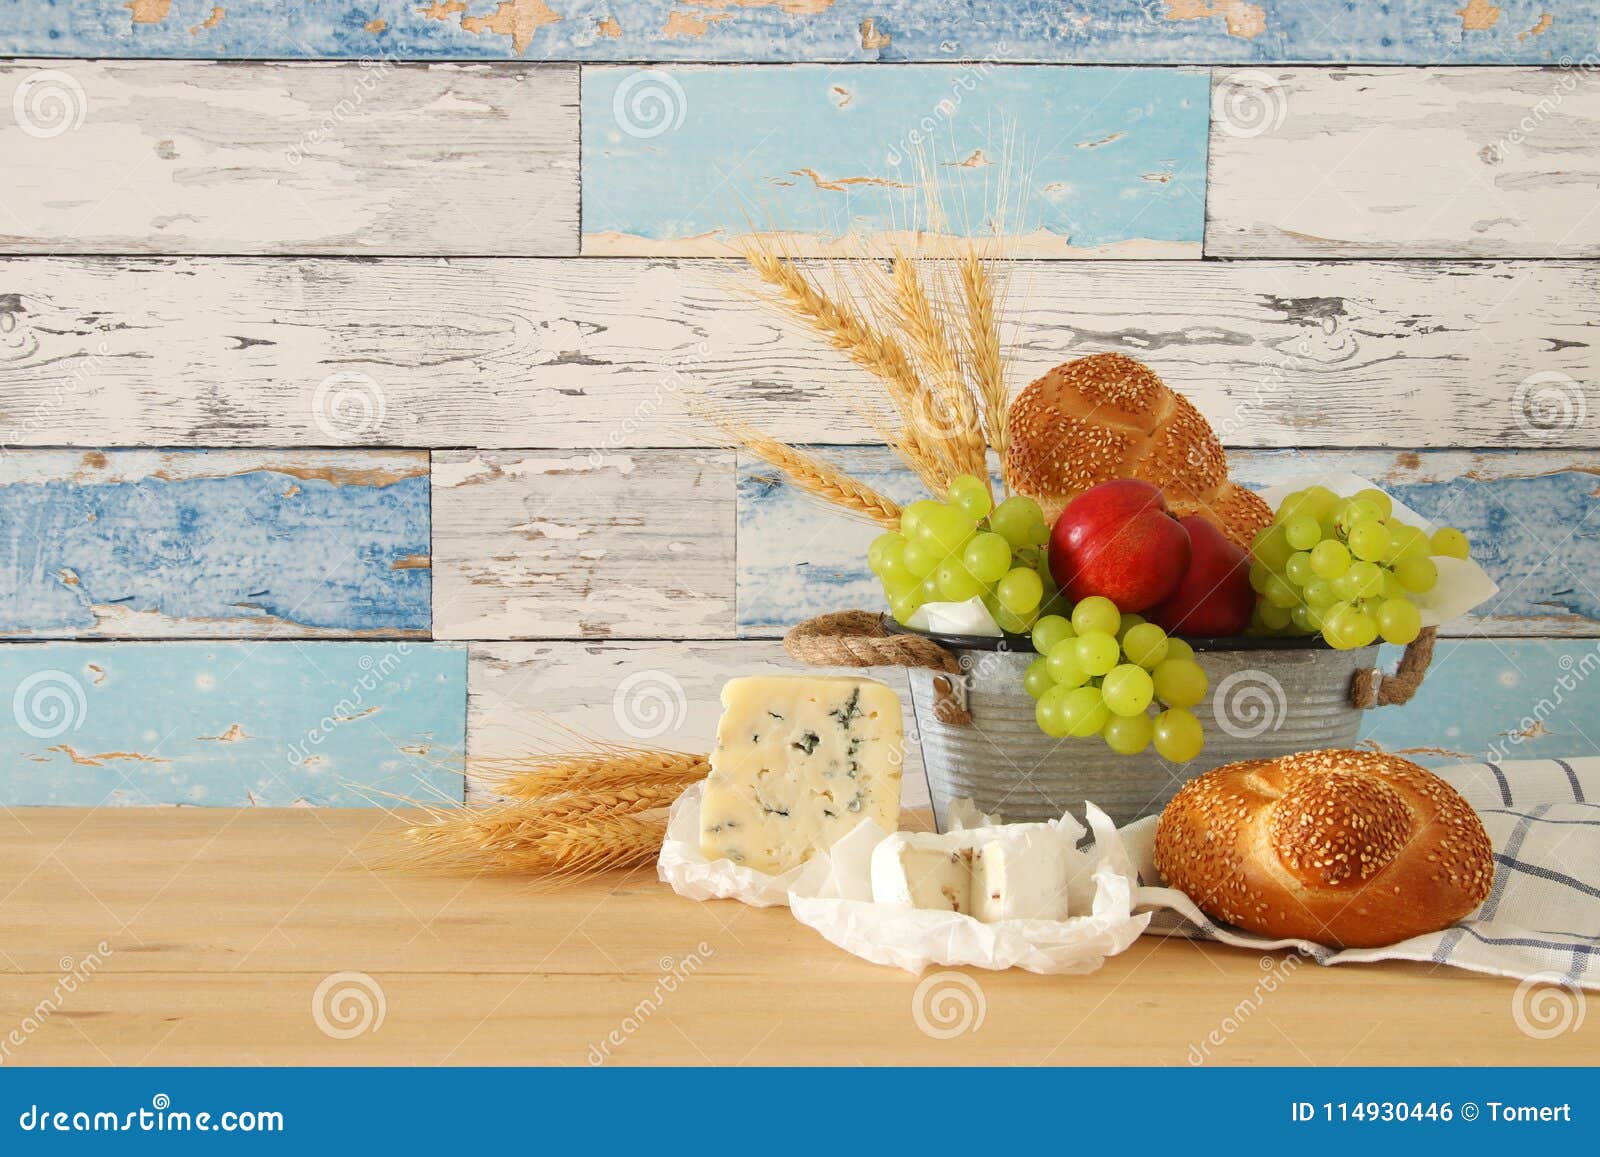 image of fruits in the tin basket over wooden table.